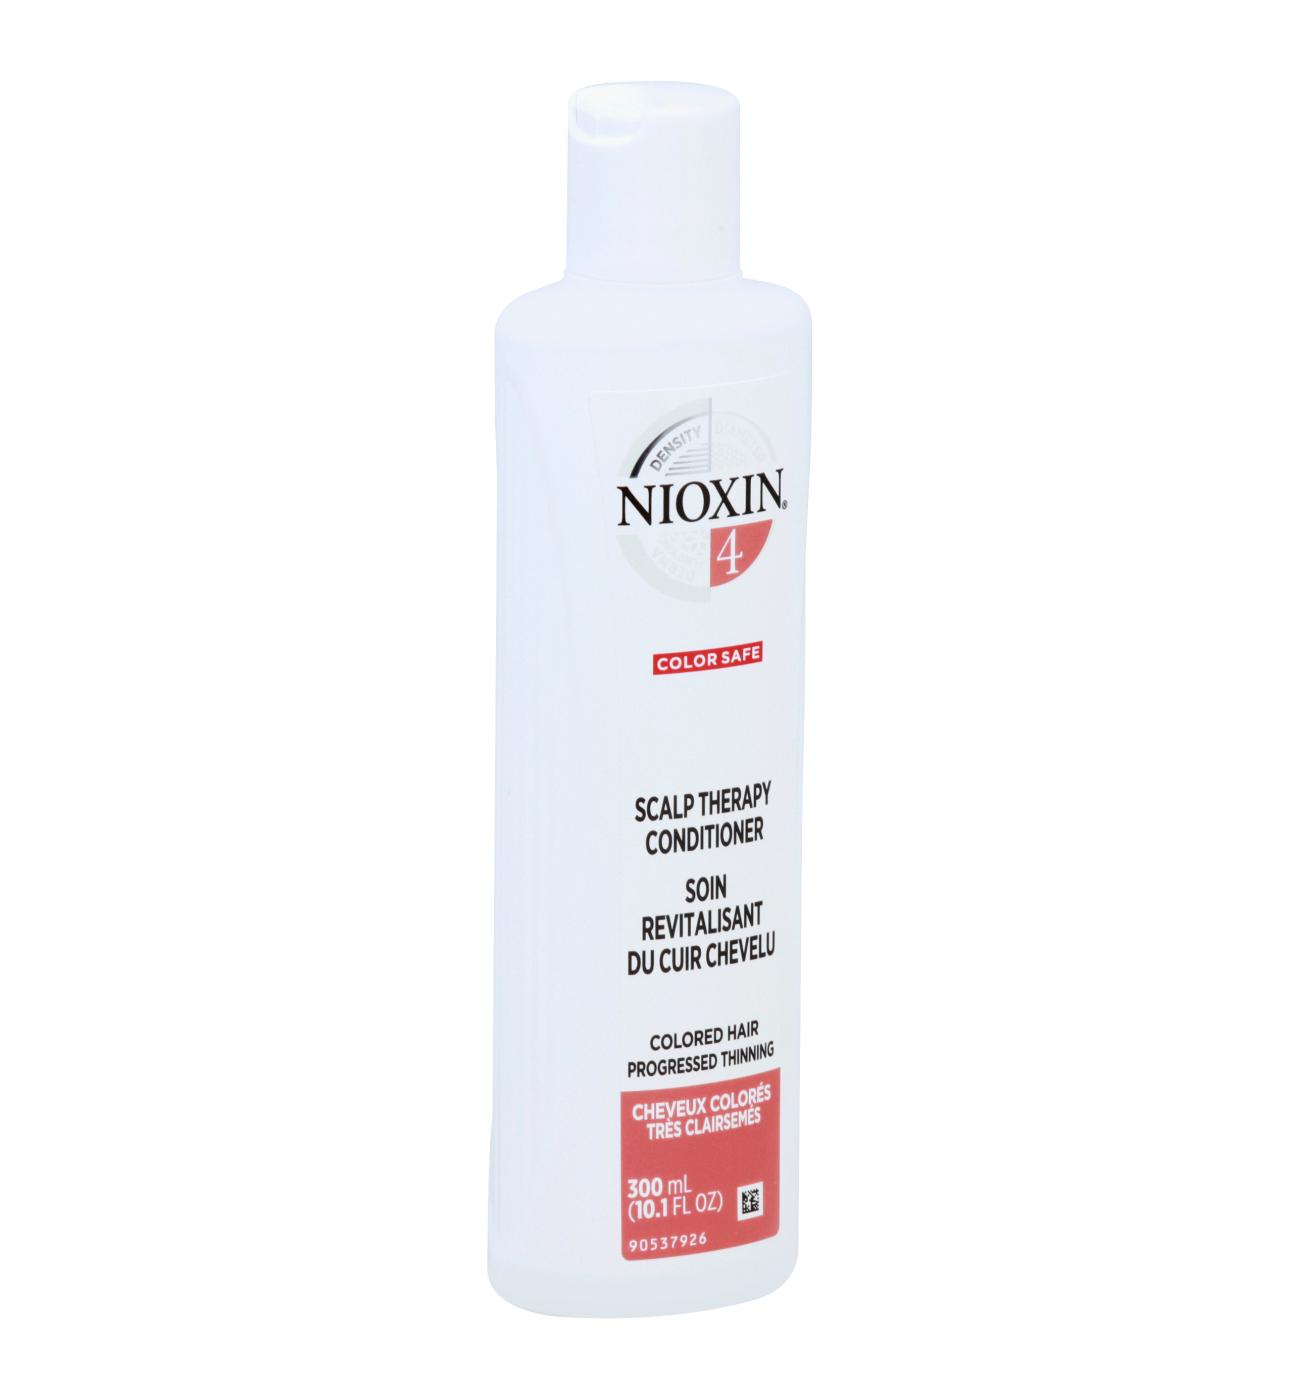 Nioxin System 4 Scalp Therapy Conditioner; image 1 of 2